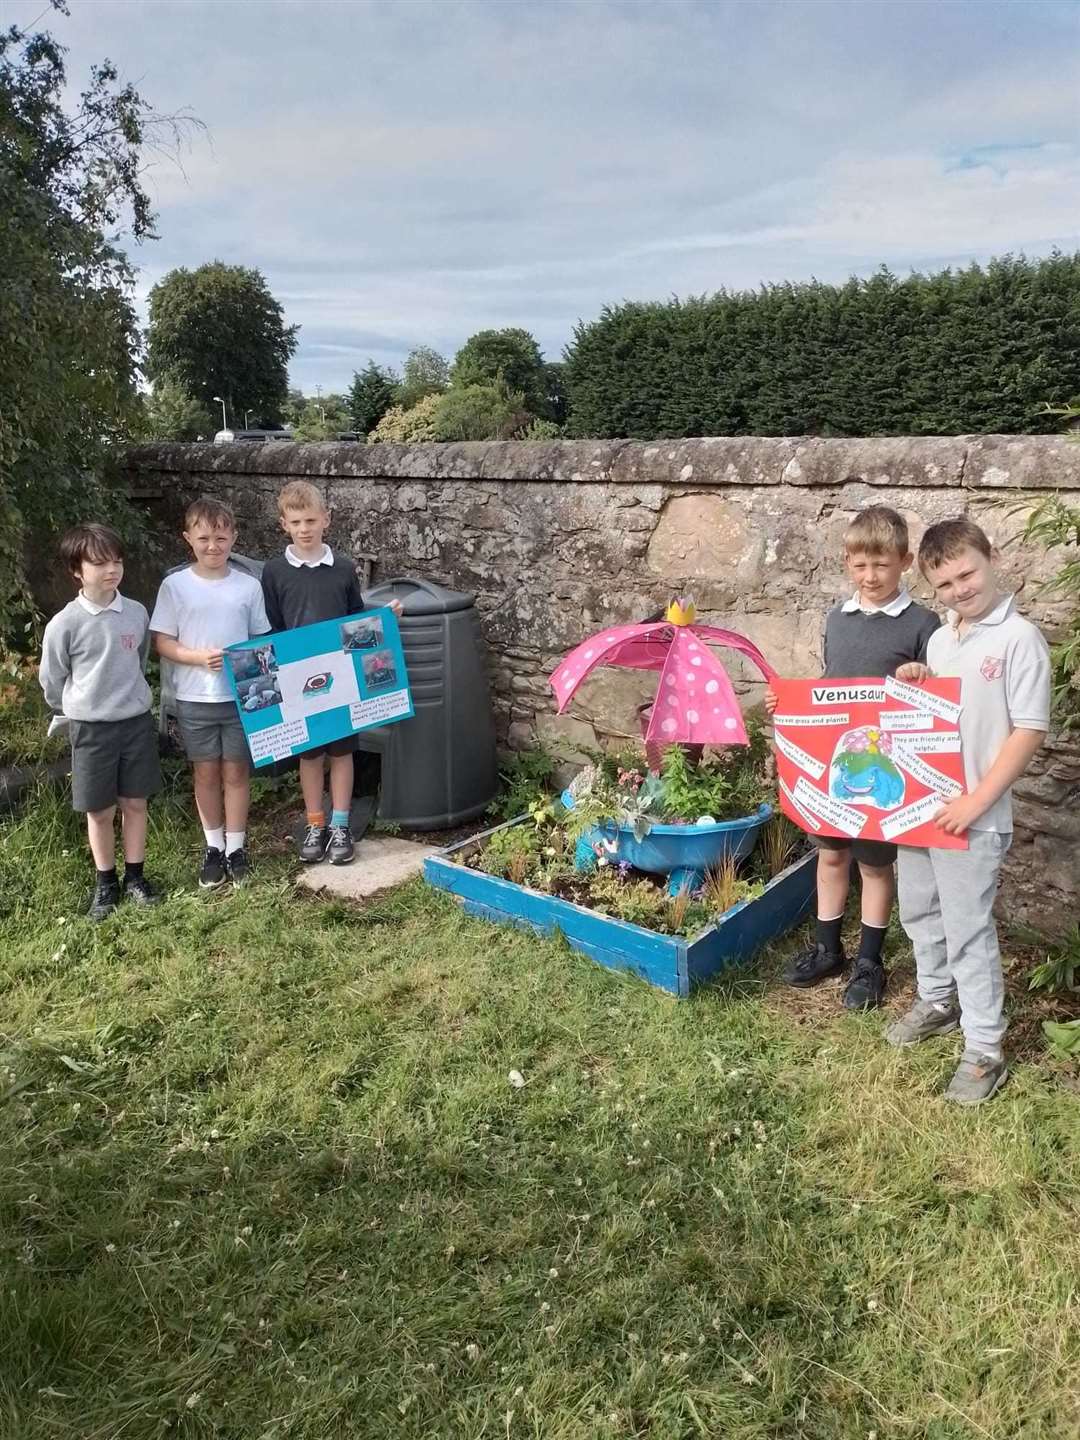 Millbank Primary Pupils were inspired in their creation by the Pokemon Venusaur.